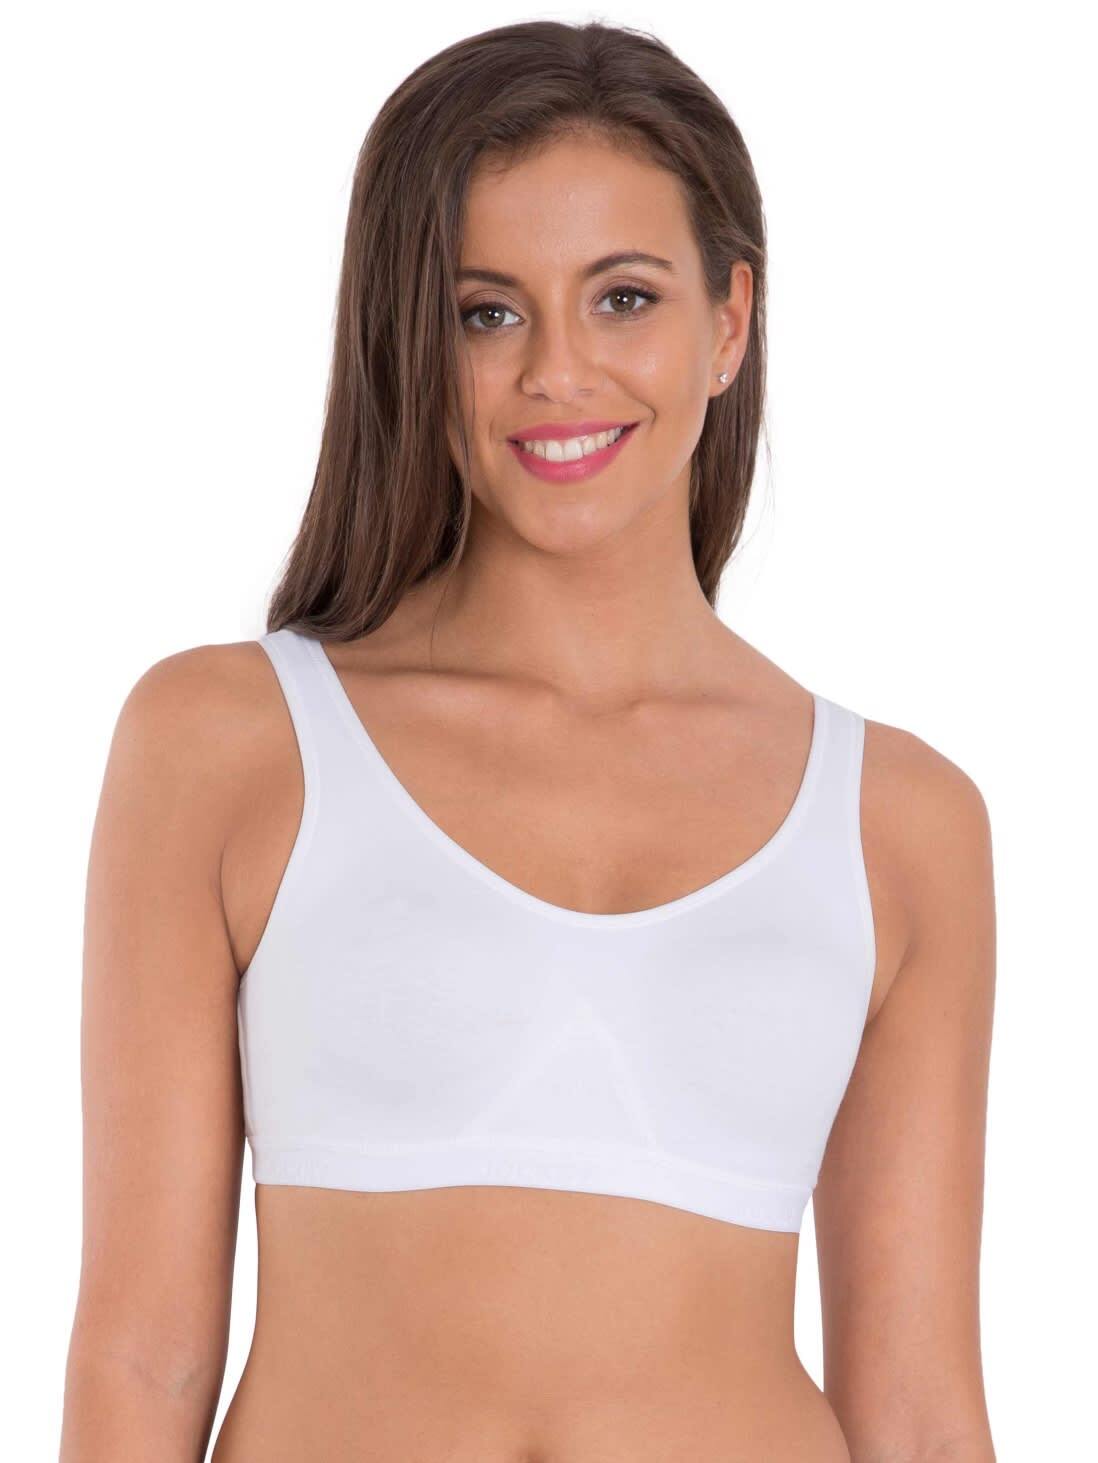 Mix Women''s Cotton Hosiery Undergarments By Lily, Model Name/number: Sport  Bra 666, 6 at Rs 65/piece in Surat